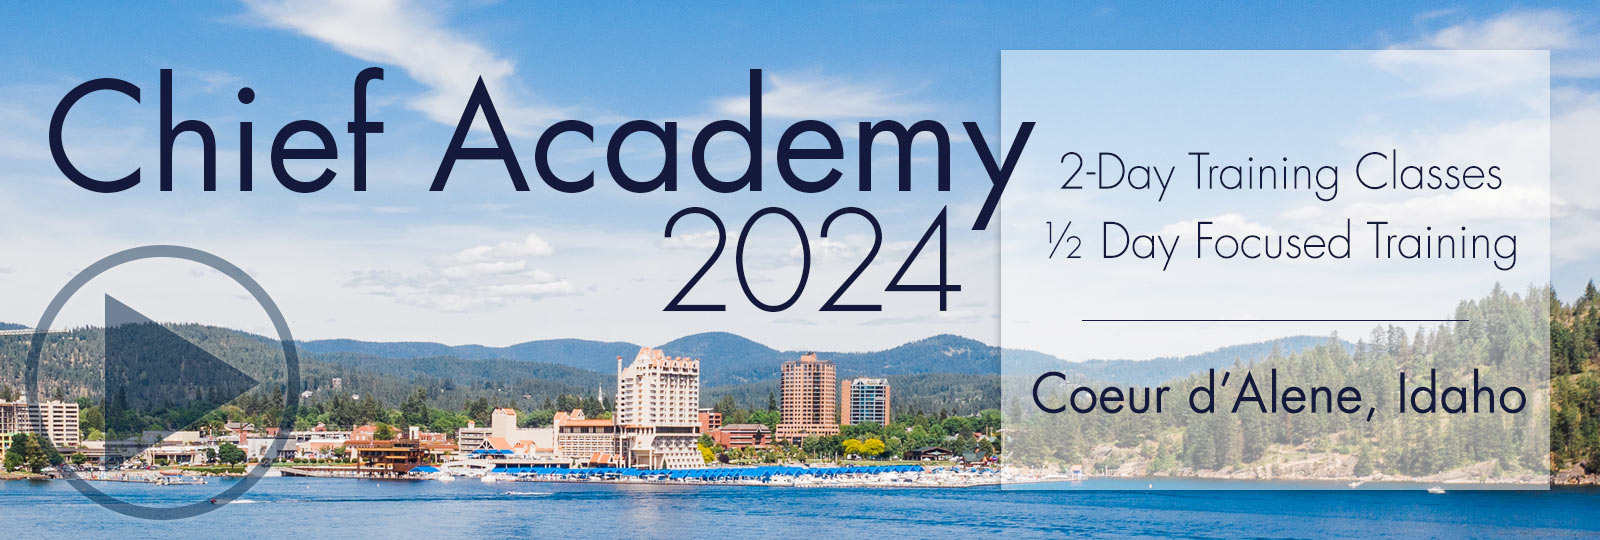 Chief Academy 2024 will consist of two days of classroom training and a half-day of focused training in Coeur d'Alene, Idaho.